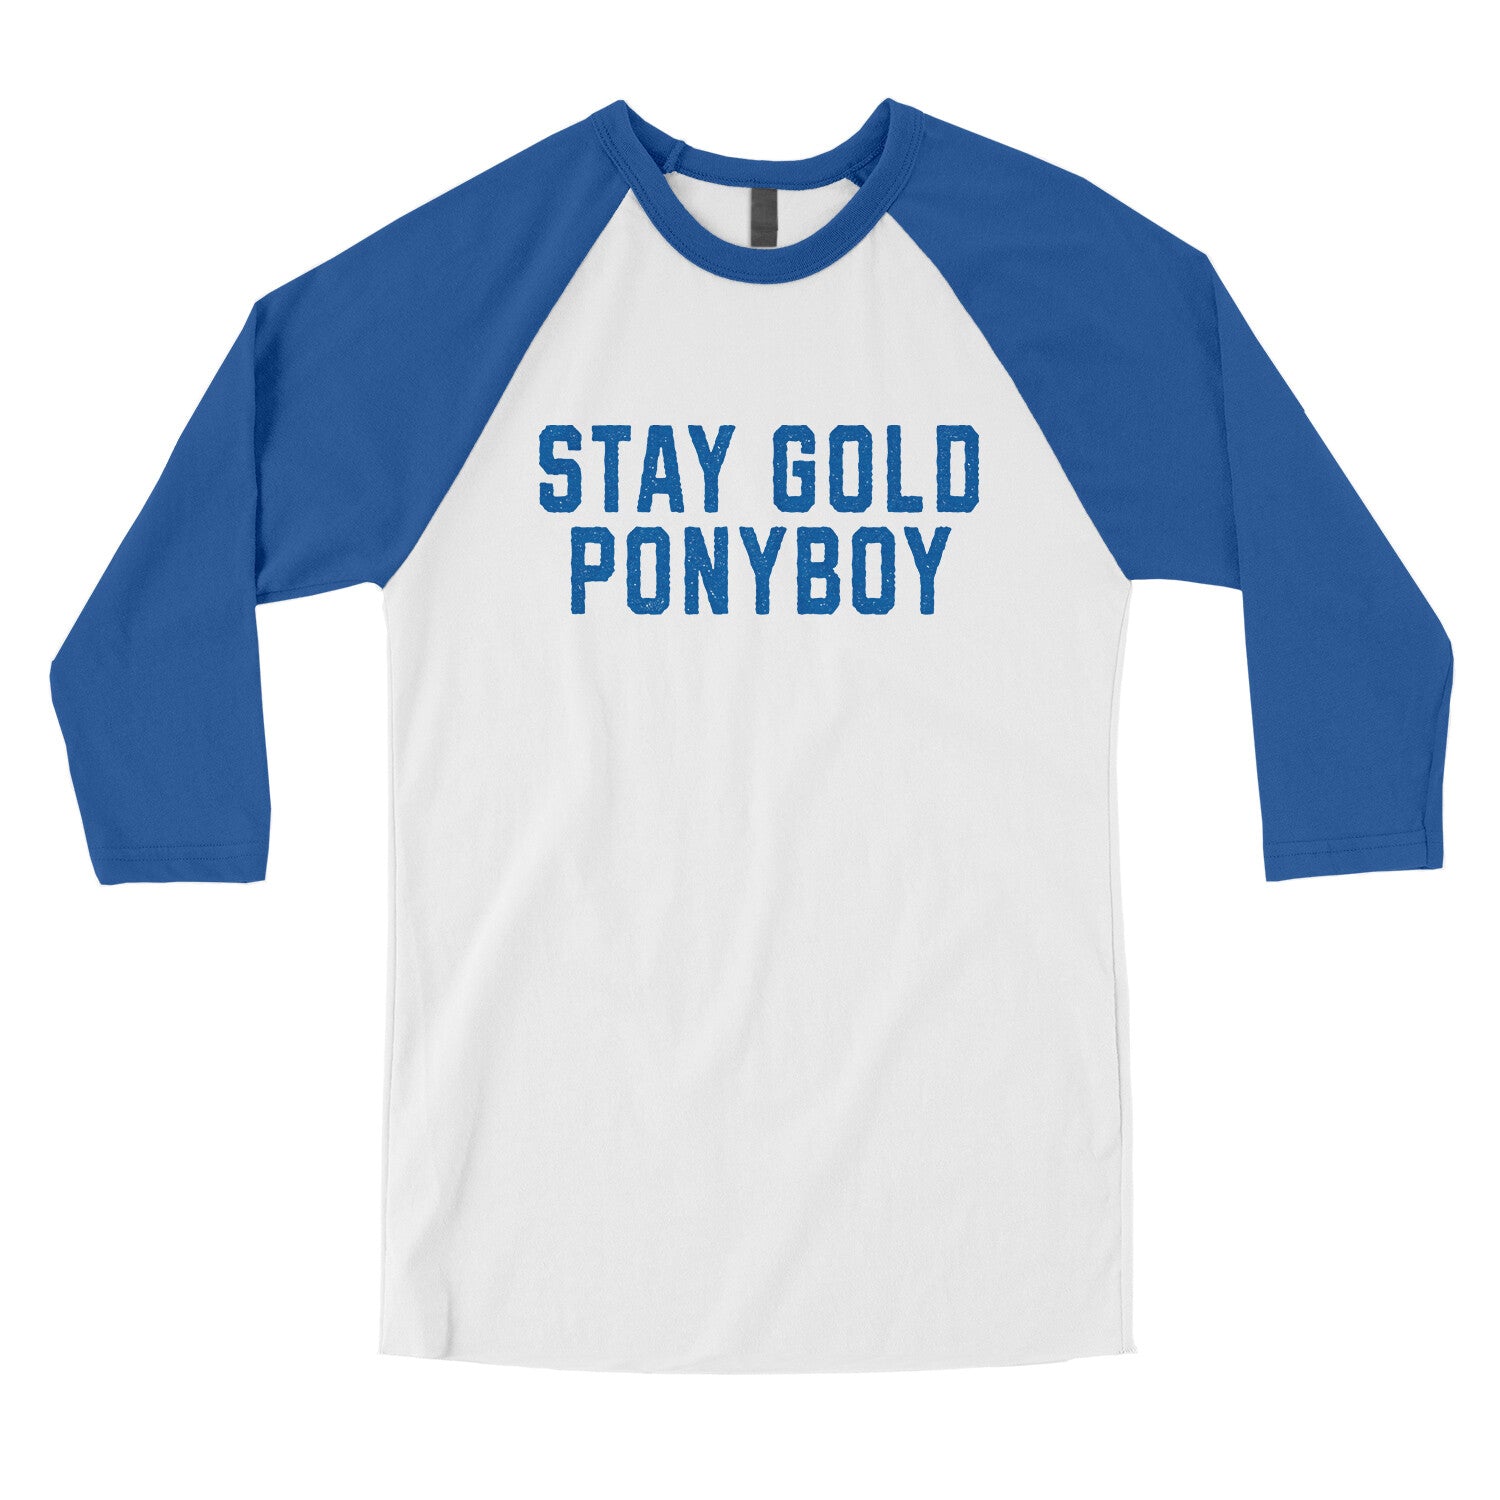 Stay Gold Ponyboy in White with True Royal Color